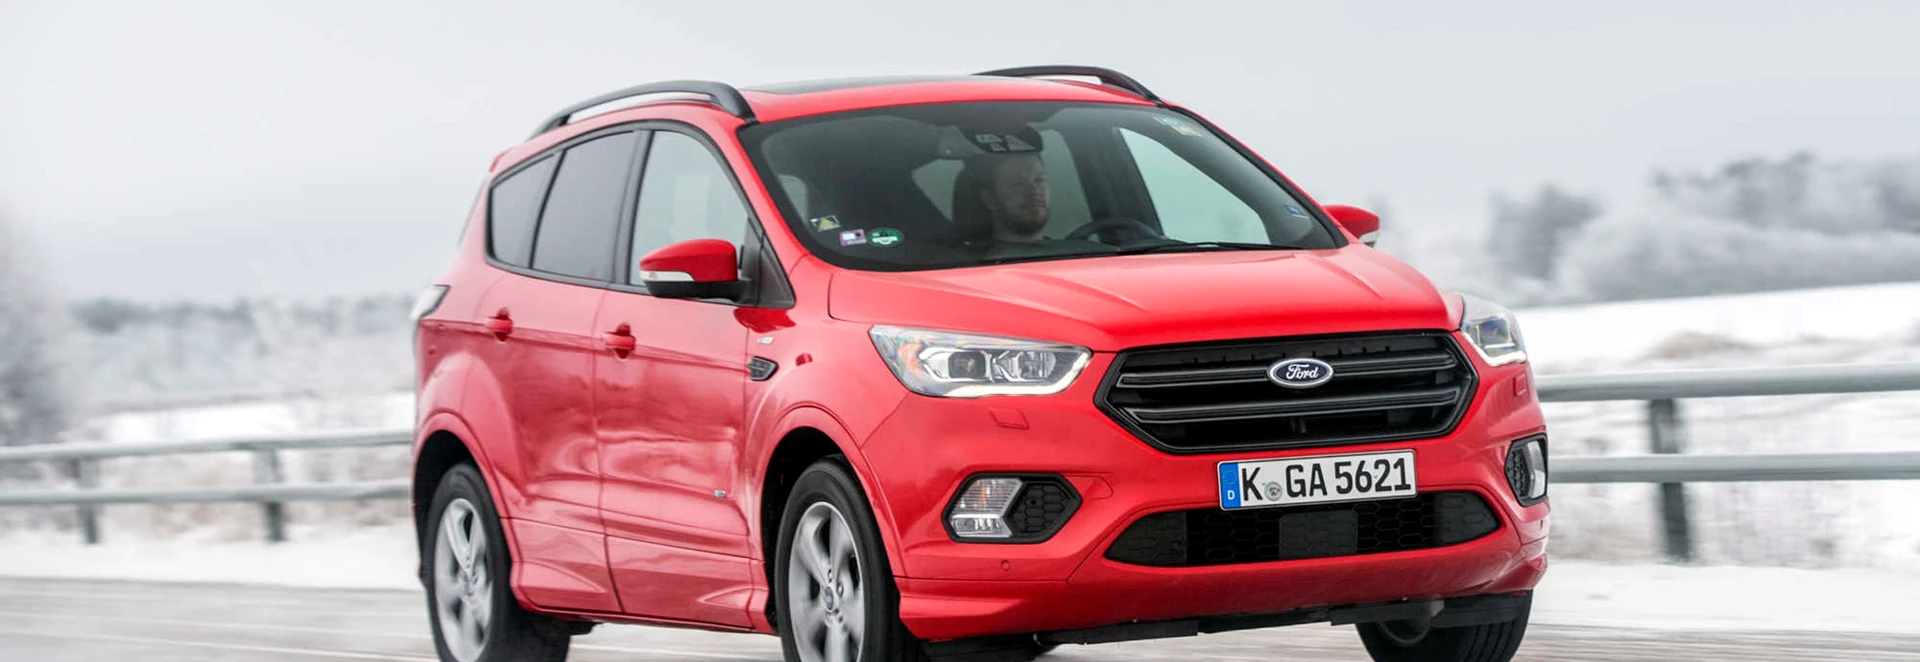 Ford Kuga ST-Line 2.0 TDCi 180 SUV review 